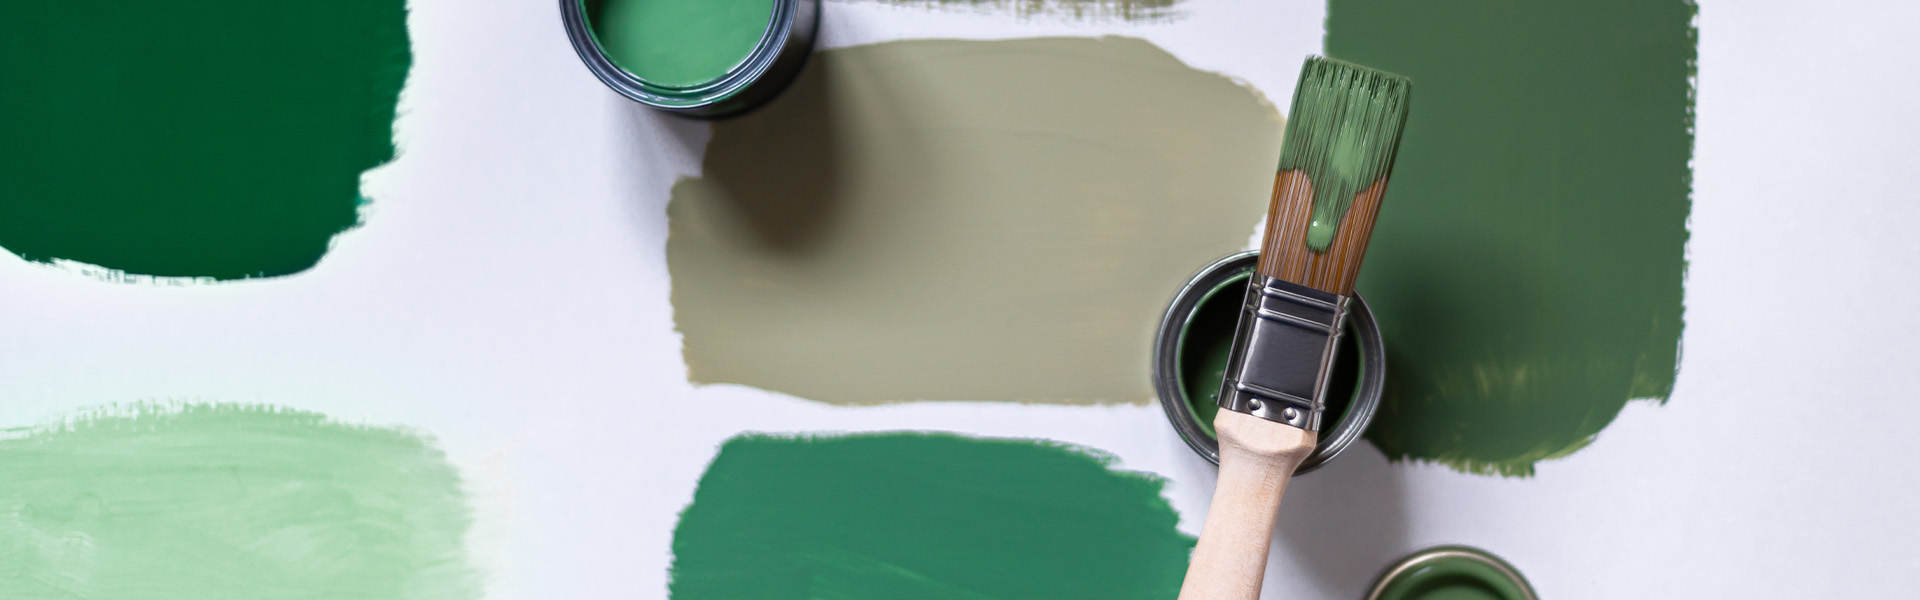 Green paint samples on wall